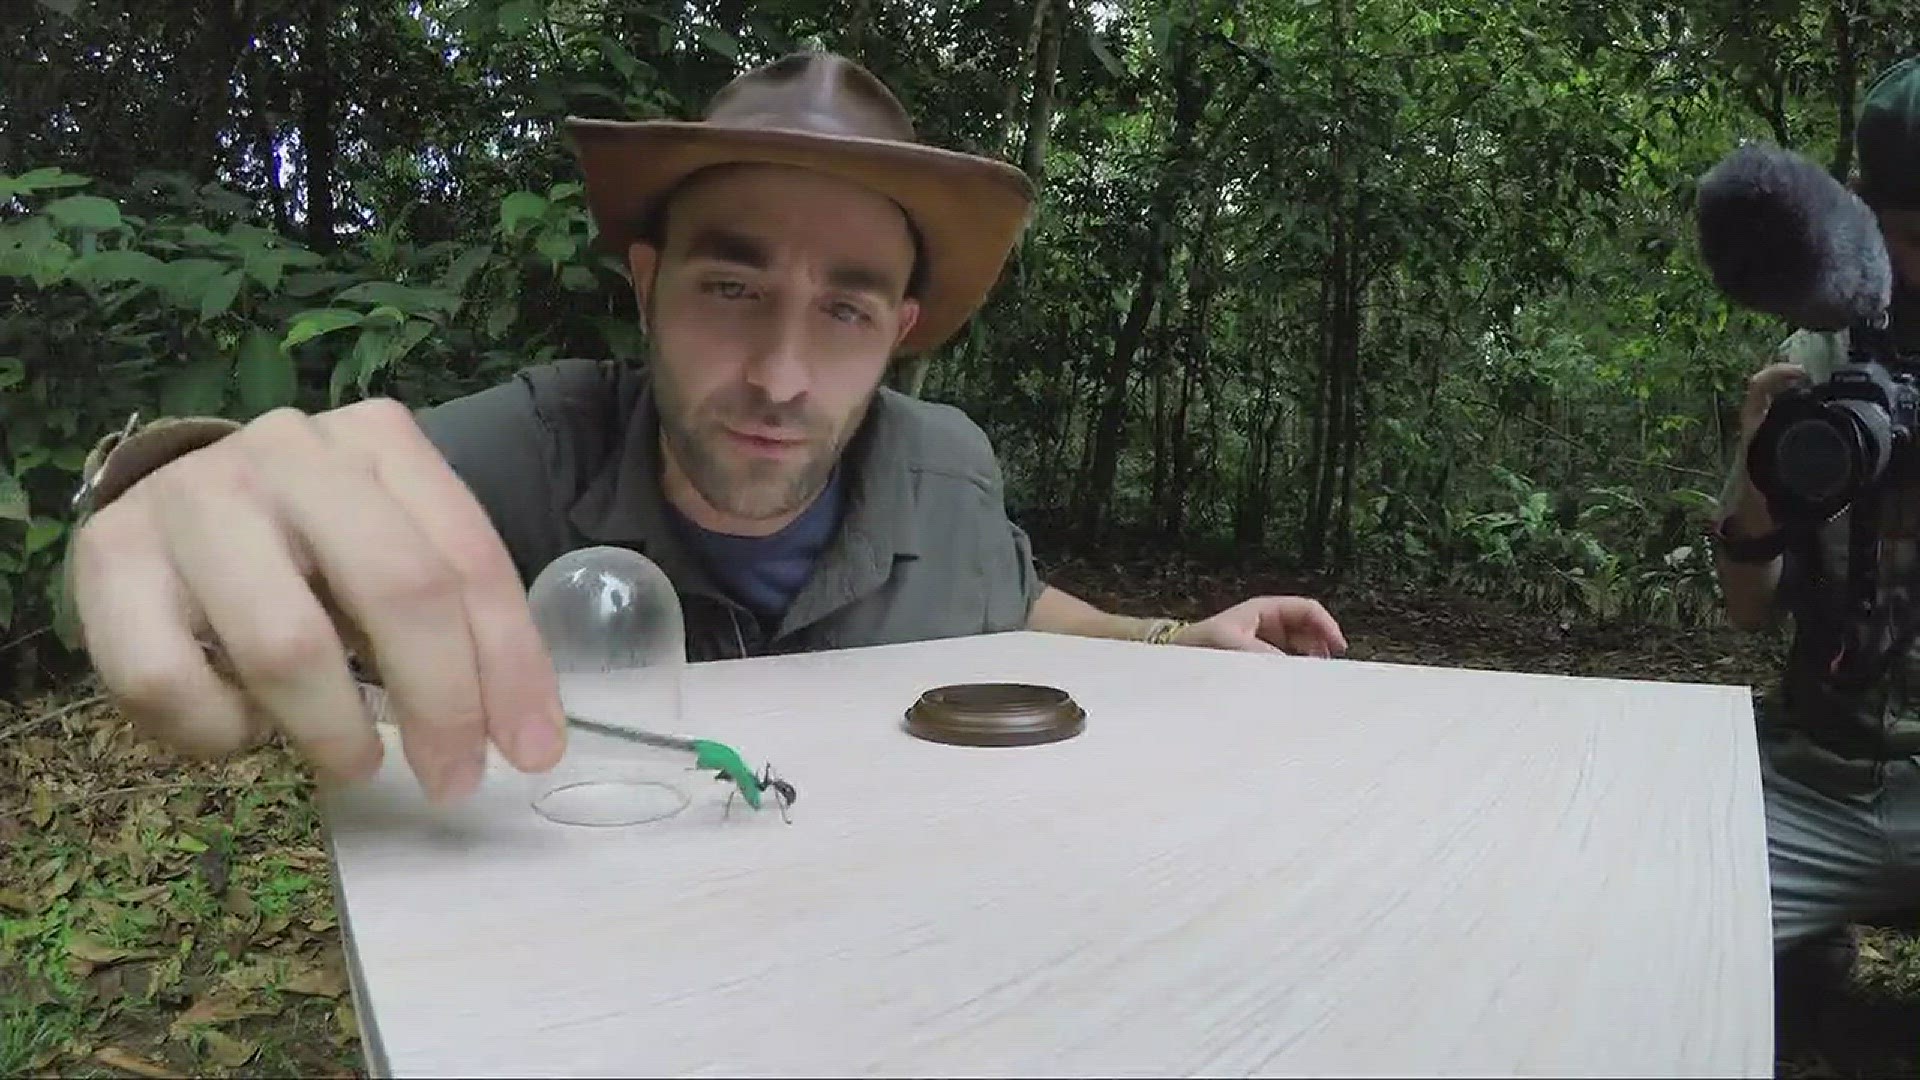 Coyote Peterson getting global following